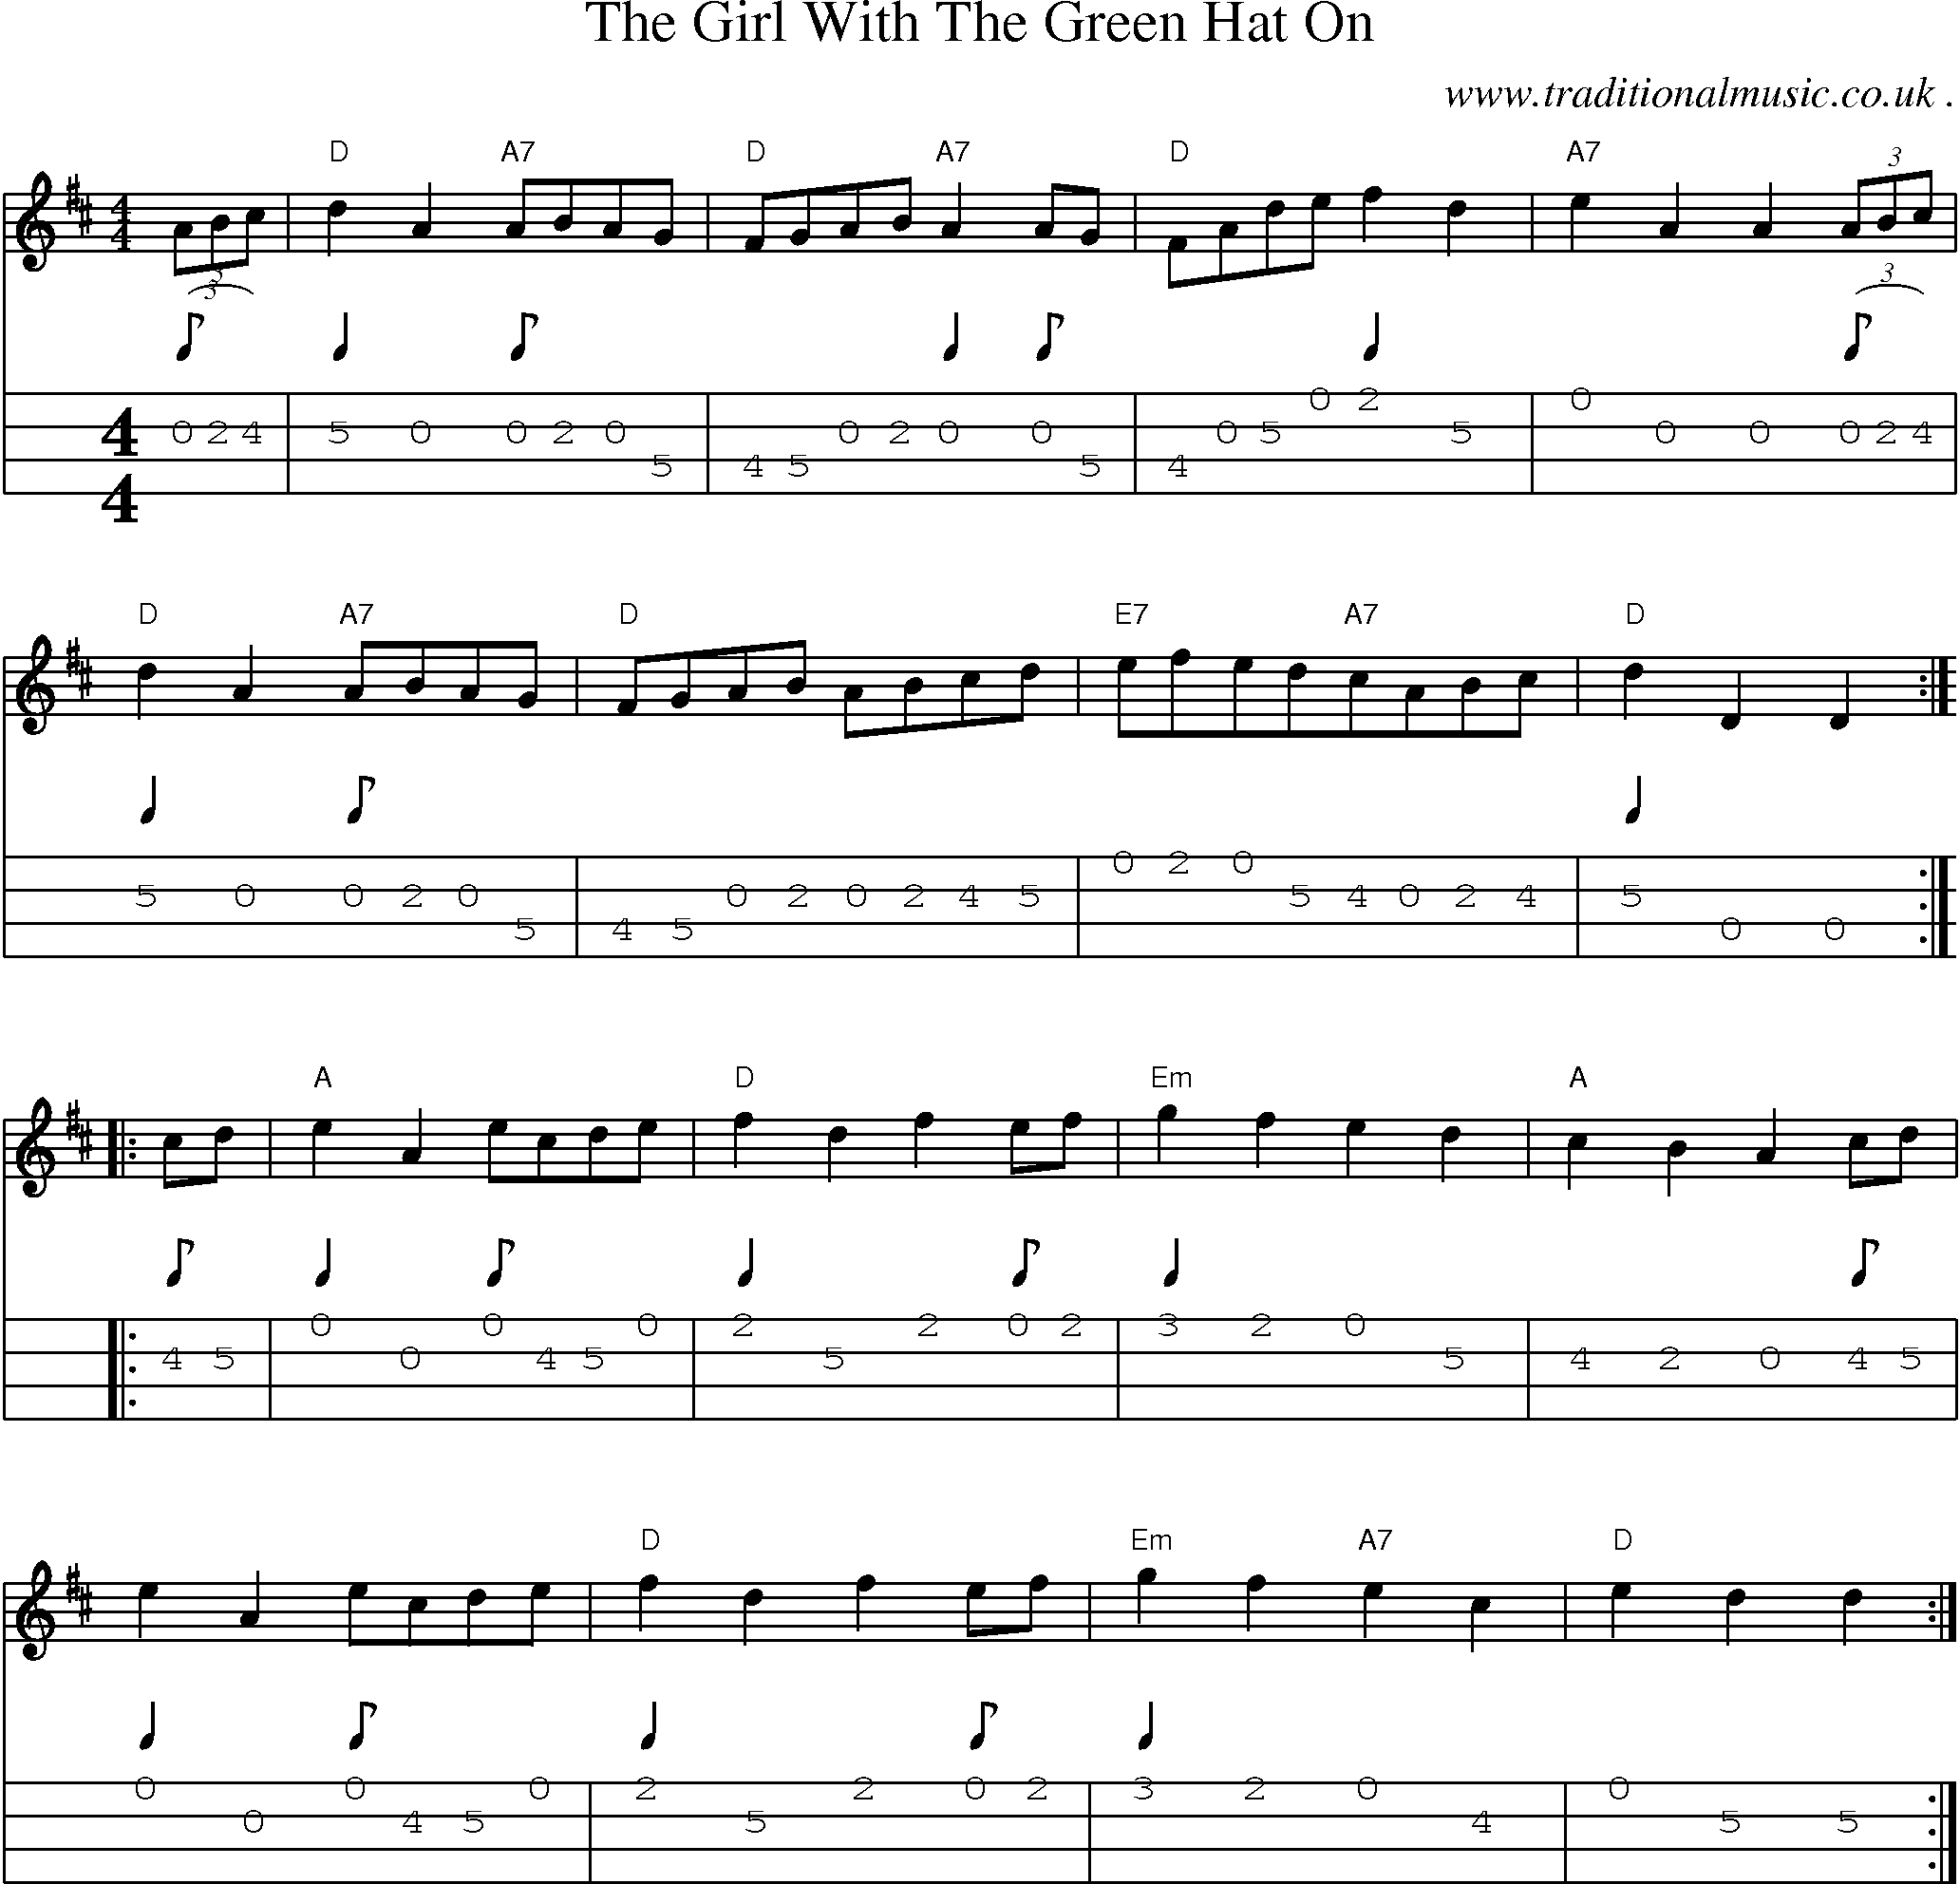 Sheet-Music and Mandolin Tabs for The Girl With The Green Hat On